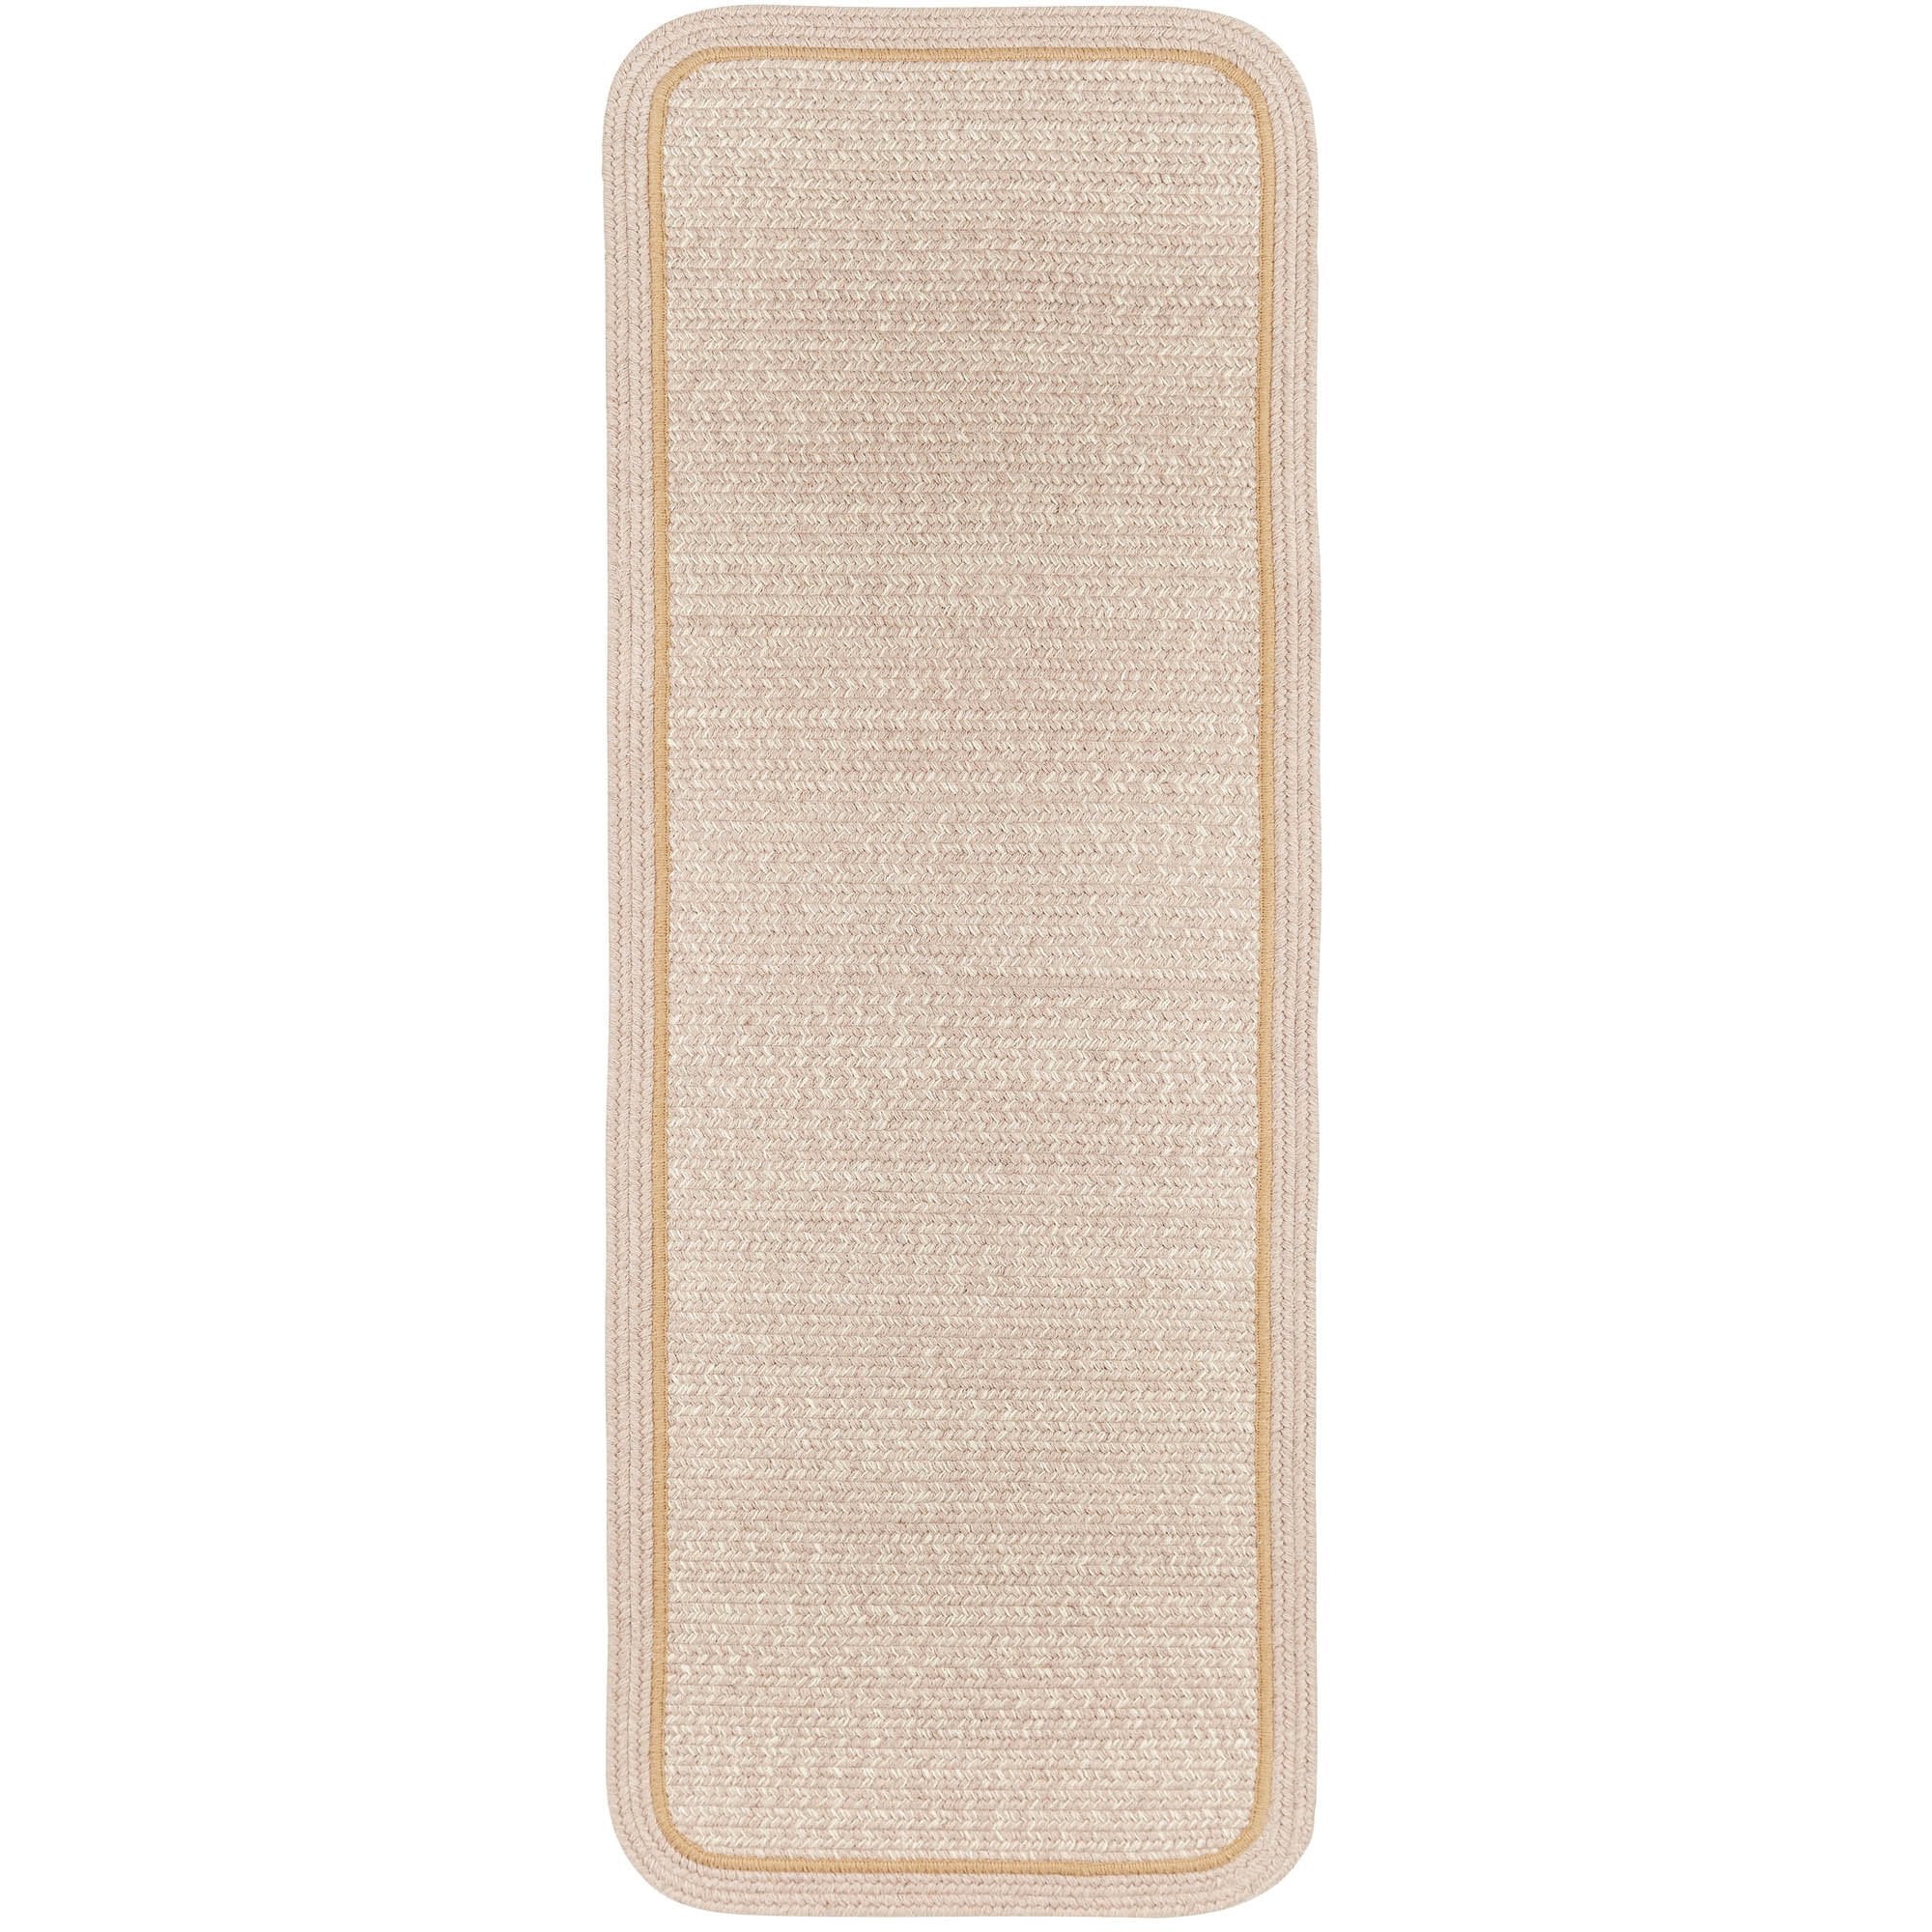 Woolmade Rounded Rectangle Braided Rug #color_sesame